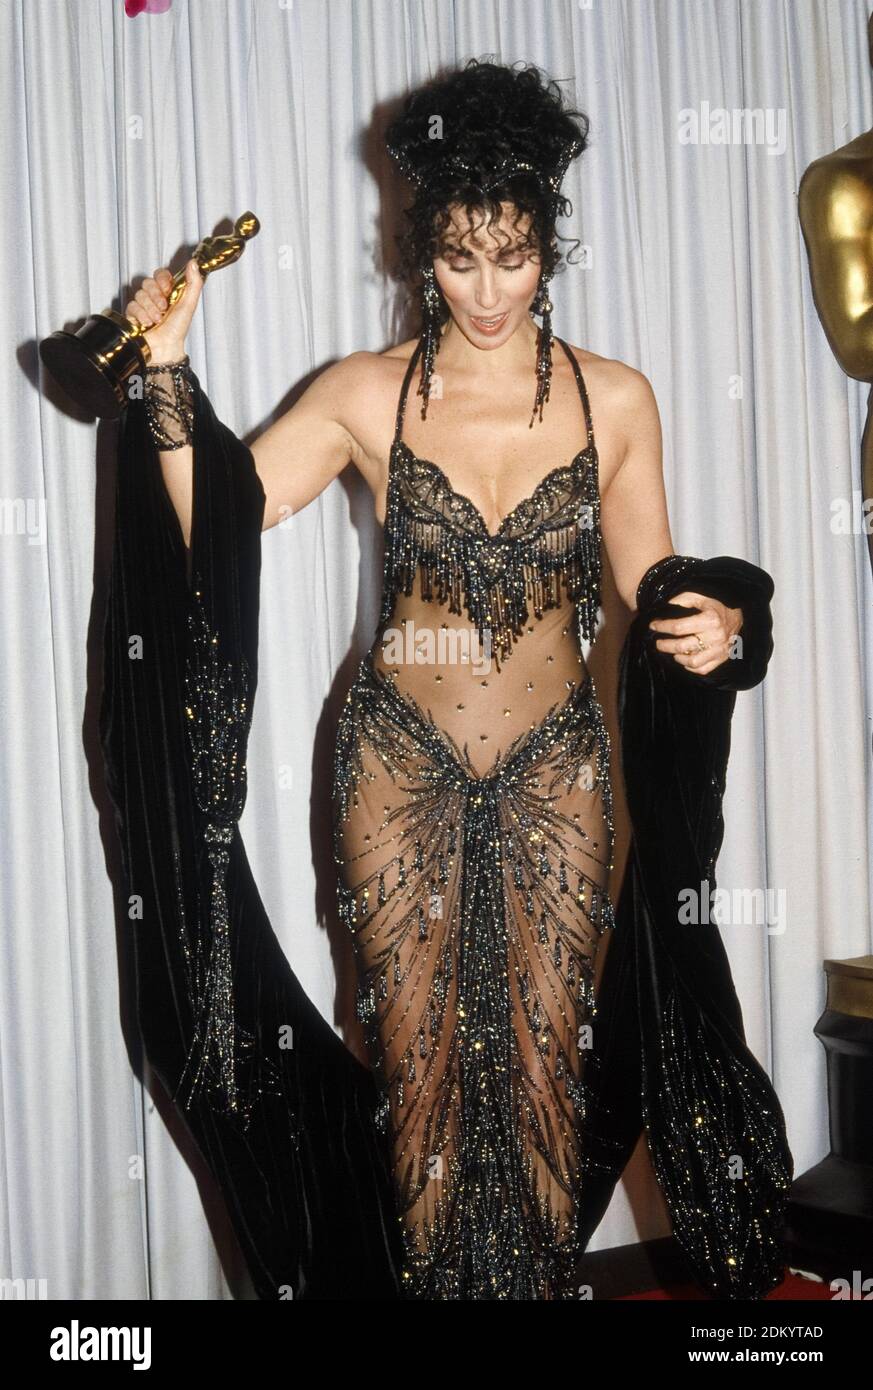 Cher at the 60th Annual Academy Awards, April 11th, 1998 / File Reference # 34000-1208PLTHA Stock Photo